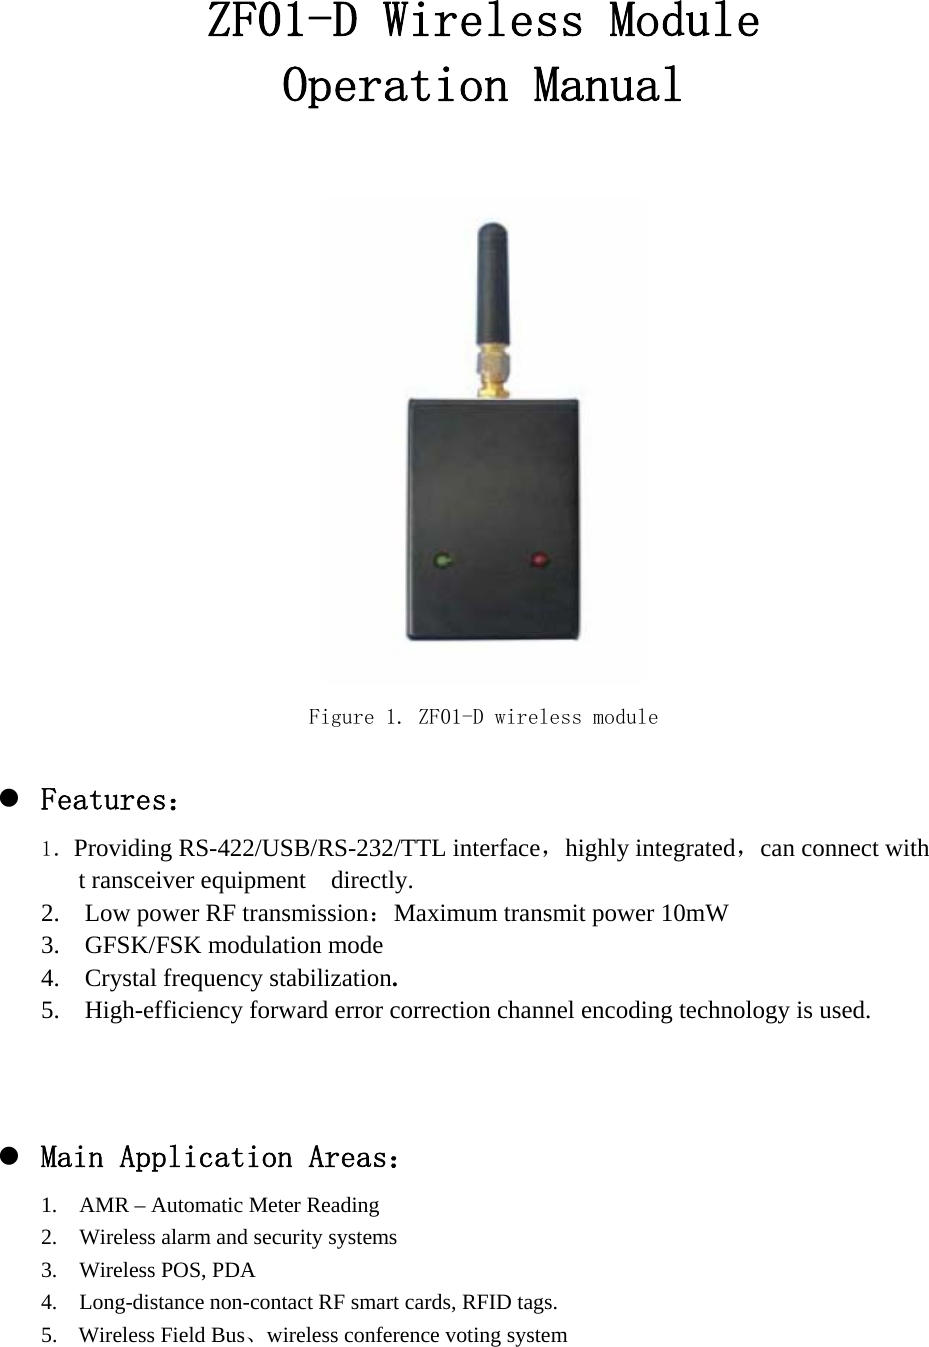 ZF01-D Wireless Module Operation Manual   Figure 1. ZF01-D wireless module  z Features： 1．Providing RS-422/USB/RS-232/TTL interface，highly integrated，can connect with   t ransceiver equipment  directly. 2.    Low power RF transmission：Maximum transmit power 10mW 3.  GFSK/FSK modulation mode 4.  Crystal frequency stabilization. 5.    High-efficiency forward error correction channel encoding technology is used.    z Main Application Areas： 1.    AMR – Automatic Meter Reading 2.    Wireless alarm and security systems 3.  Wireless POS, PDA  4.    Long-distance non-contact RF smart cards, RFID tags. 5. Wireless Field Bus、wireless conference voting system      